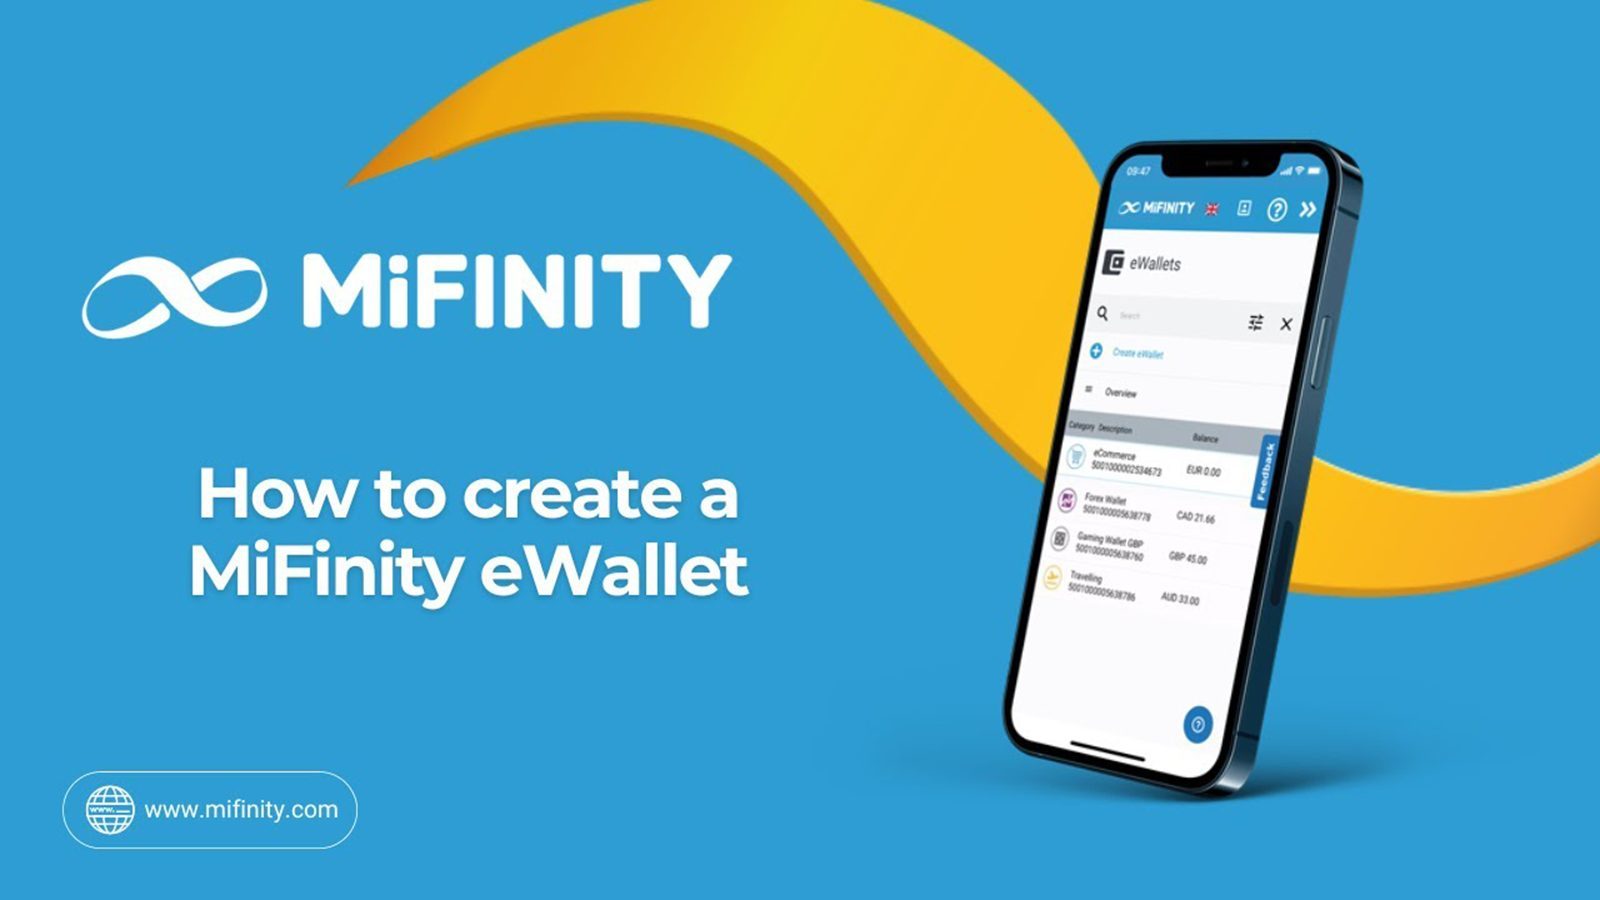 MiFinity - Guide to Secure Online Casino Banking